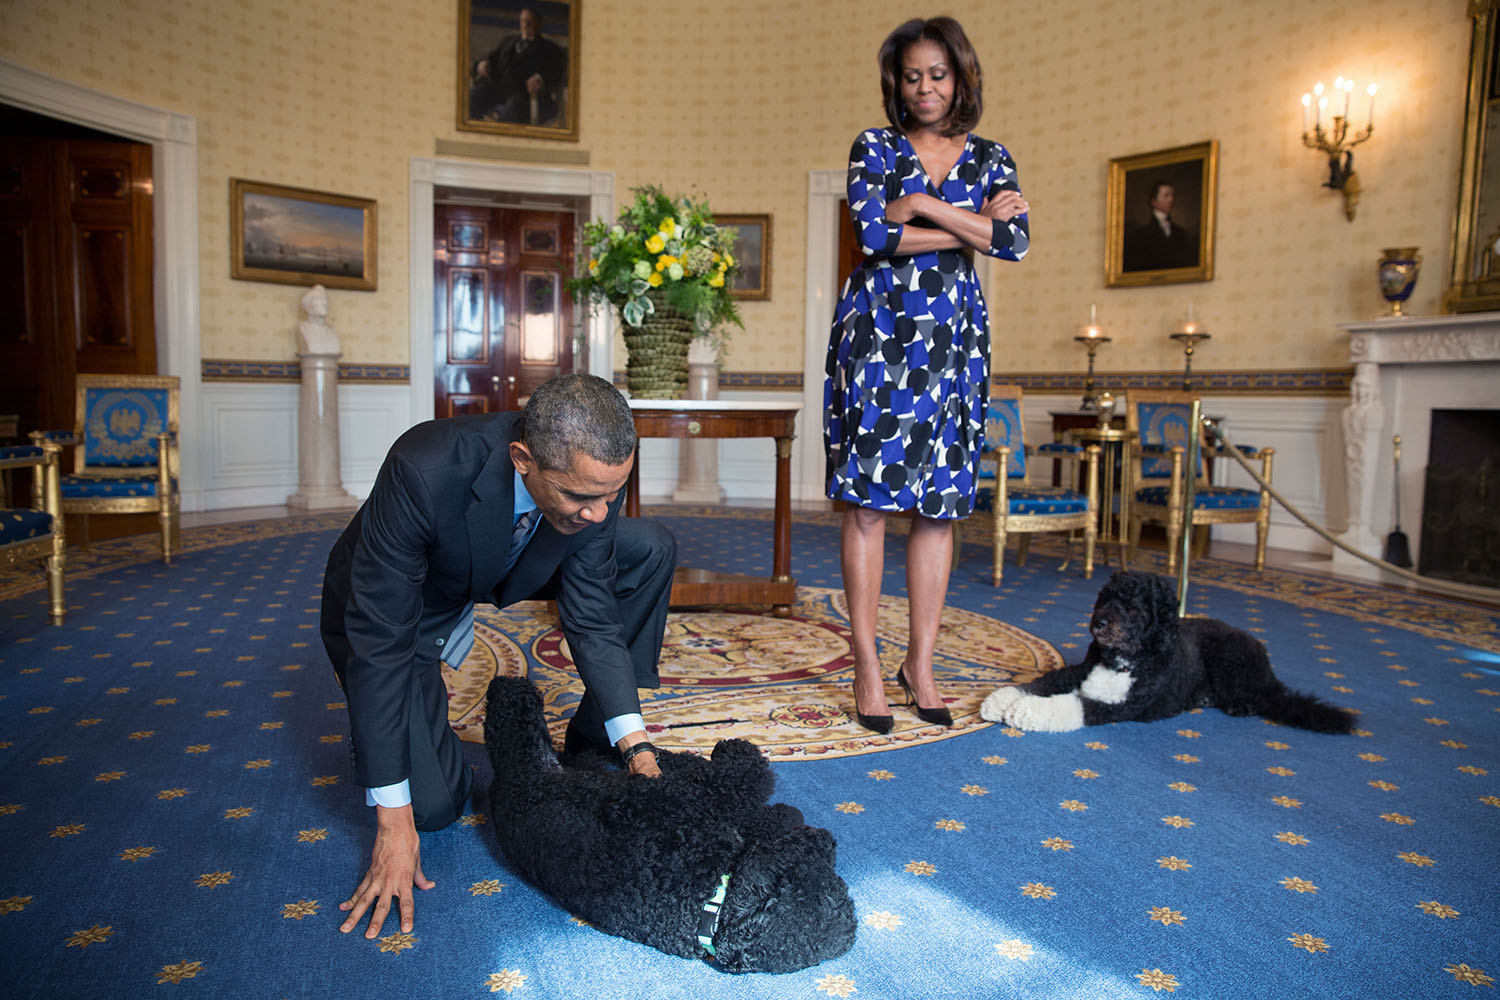 Barack Obama and Michelle Obama, joined by family pets Sunny and Bo, wait to greet visitors in the Blue Room during a White House tour, Nov. 5, 2013.